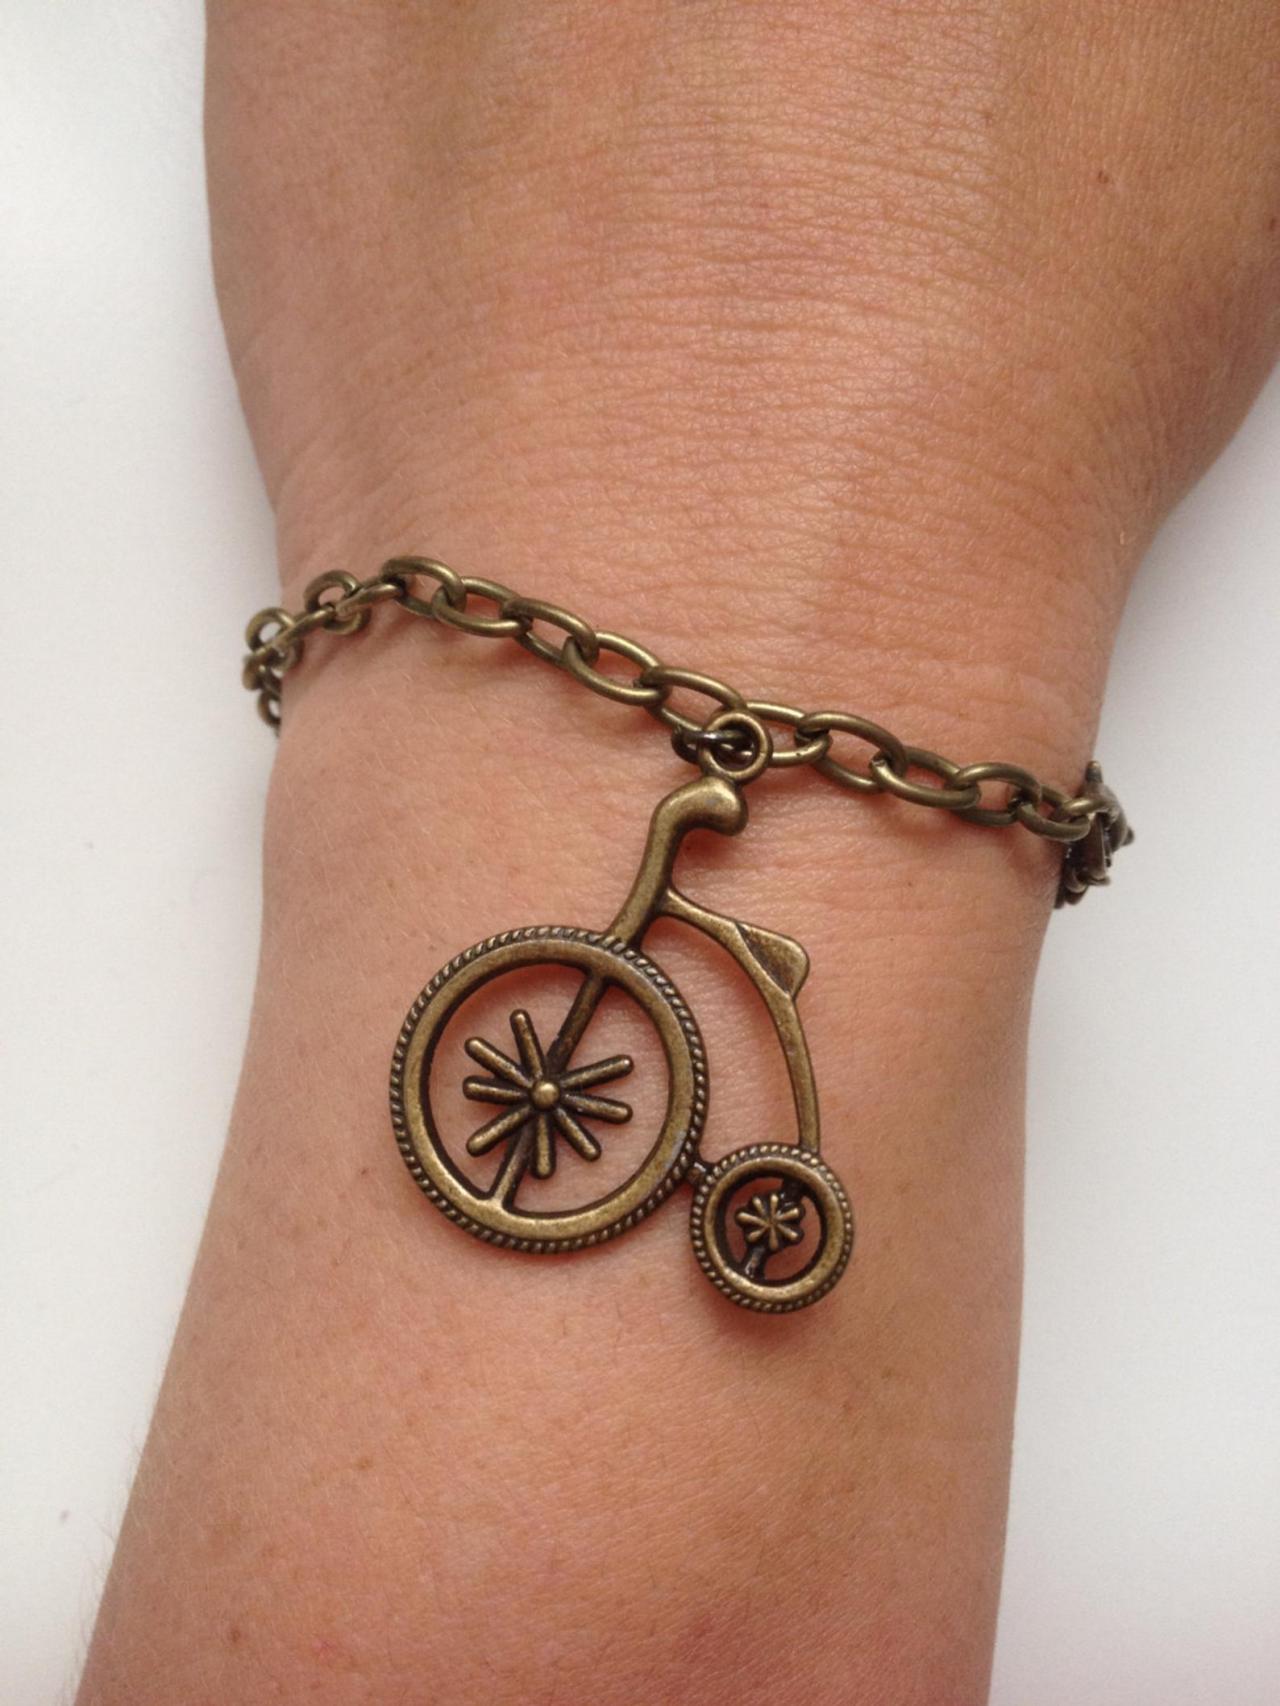 Old Bicycle Chain Bracelet 40- Friendship Bronze Chain Cuff Bracelet Old Bicycle Gift Adjustable Current Womenswear Unique Innovative